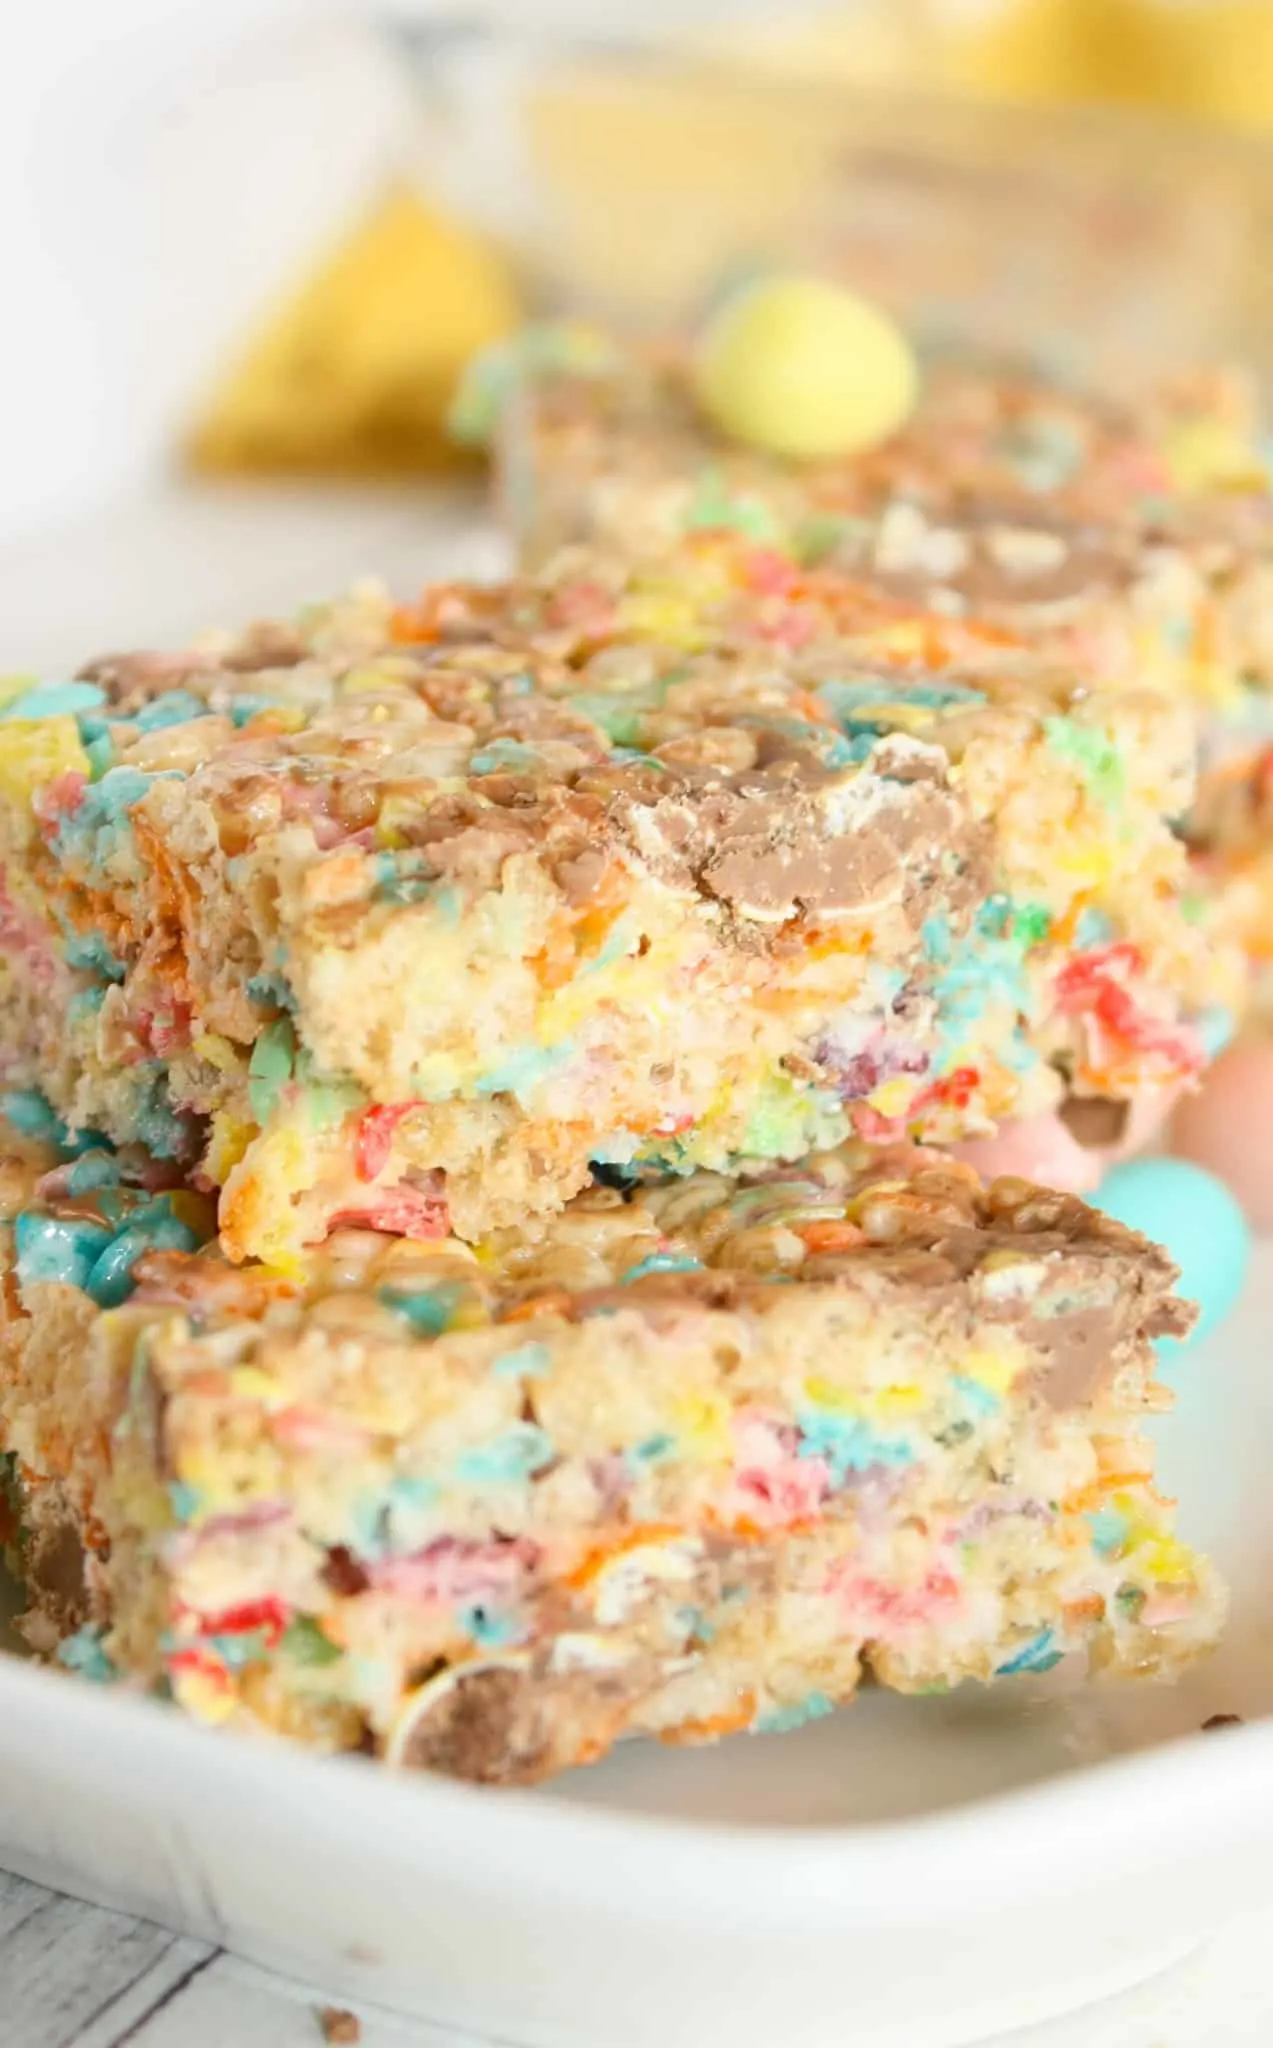 Fruity Pebbles Rice Crispy Treats are a delicious and colourful cereal square that can brighten up any dessert tray.